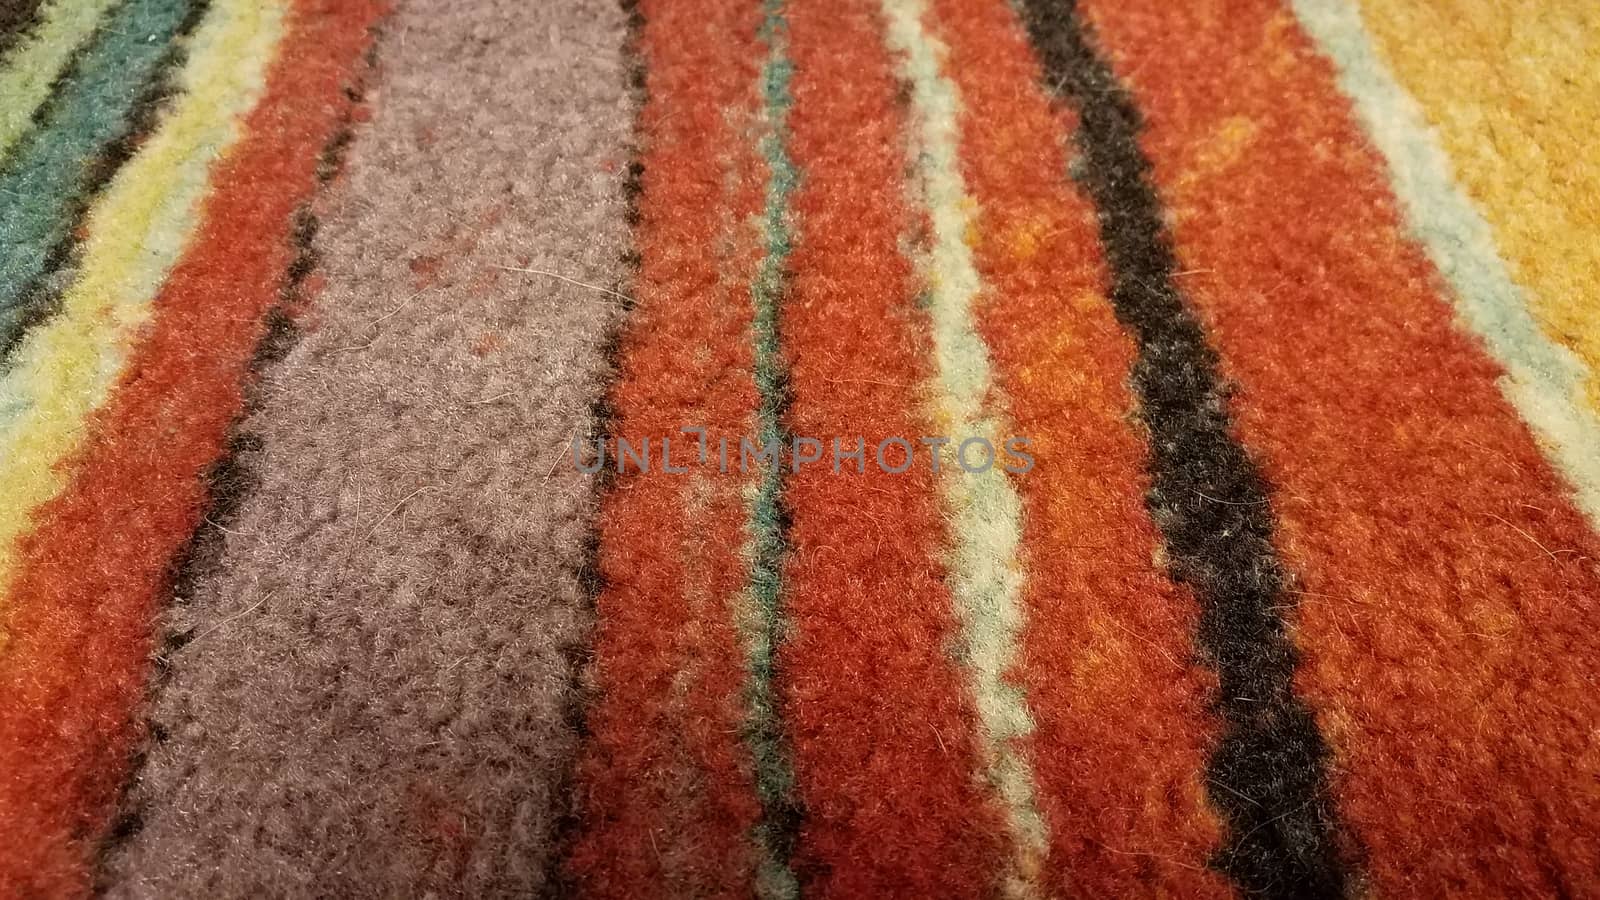 colorful carpet or rug with dog or cat hair